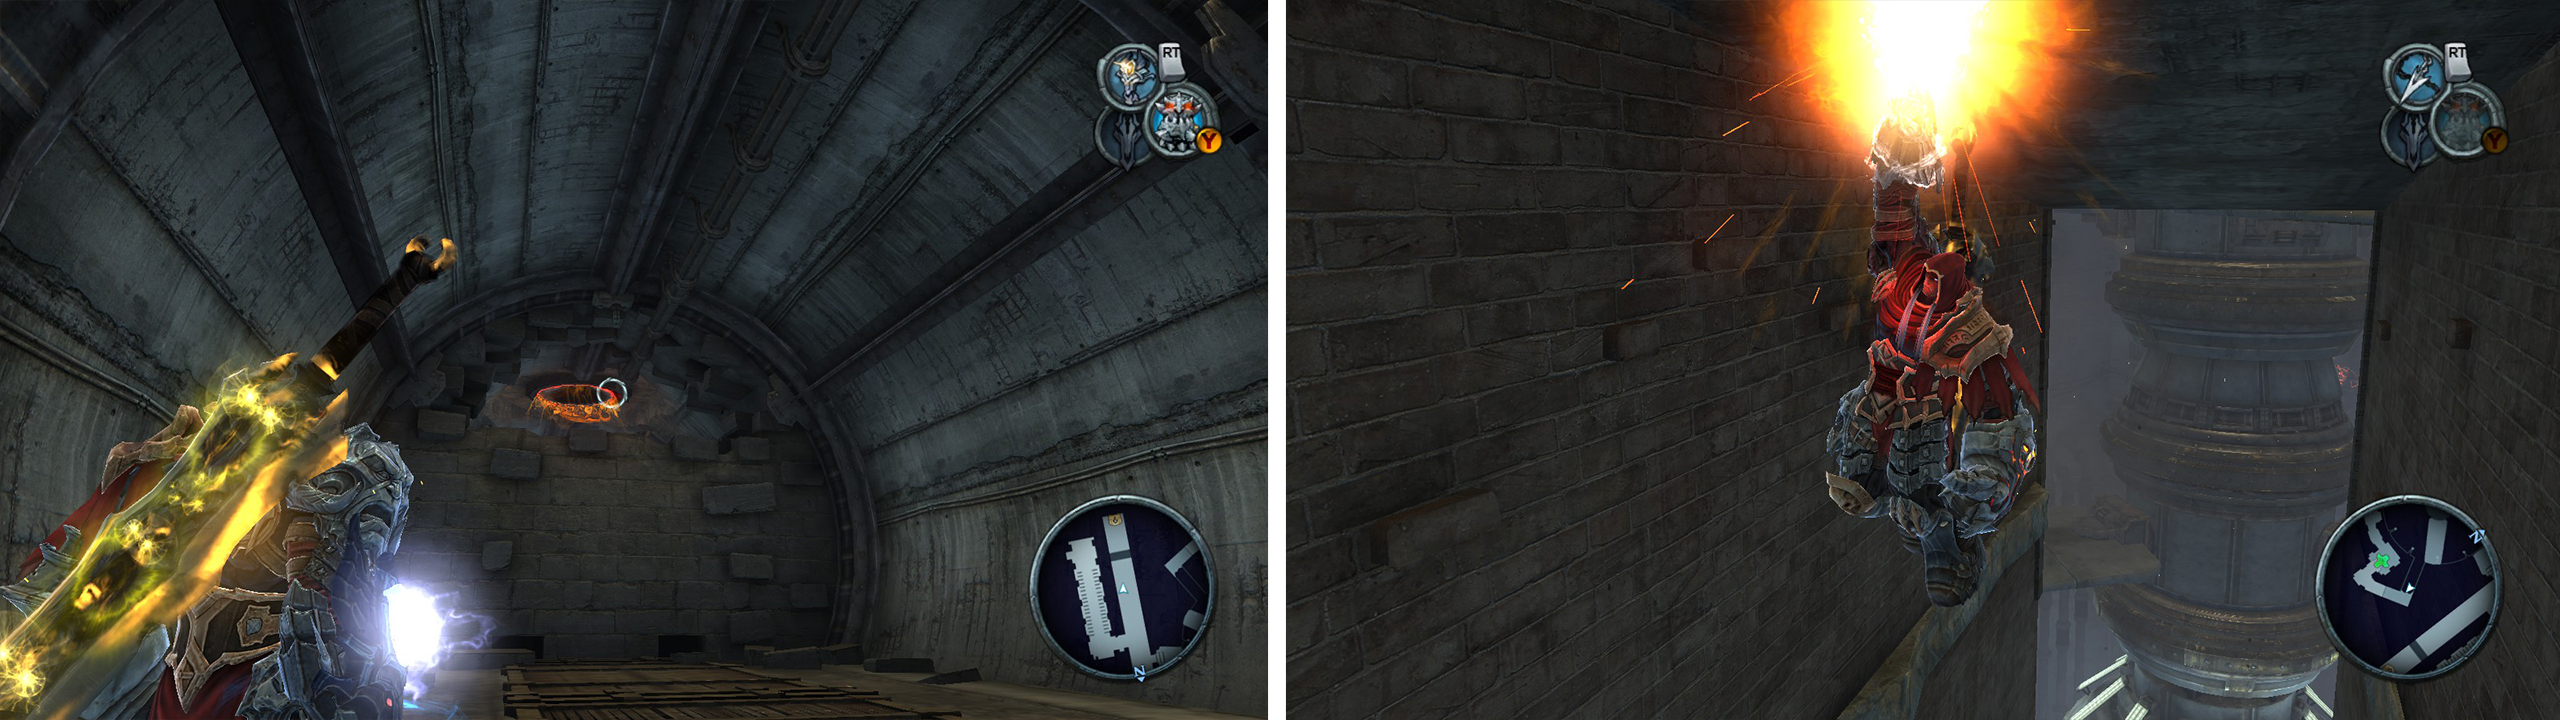 Look for a portal pad on the roof (left). Use the fan to hop down and reach a grapple point (right). Keep moving to find an Artefact and a Wrath Shard through a second portal pad.